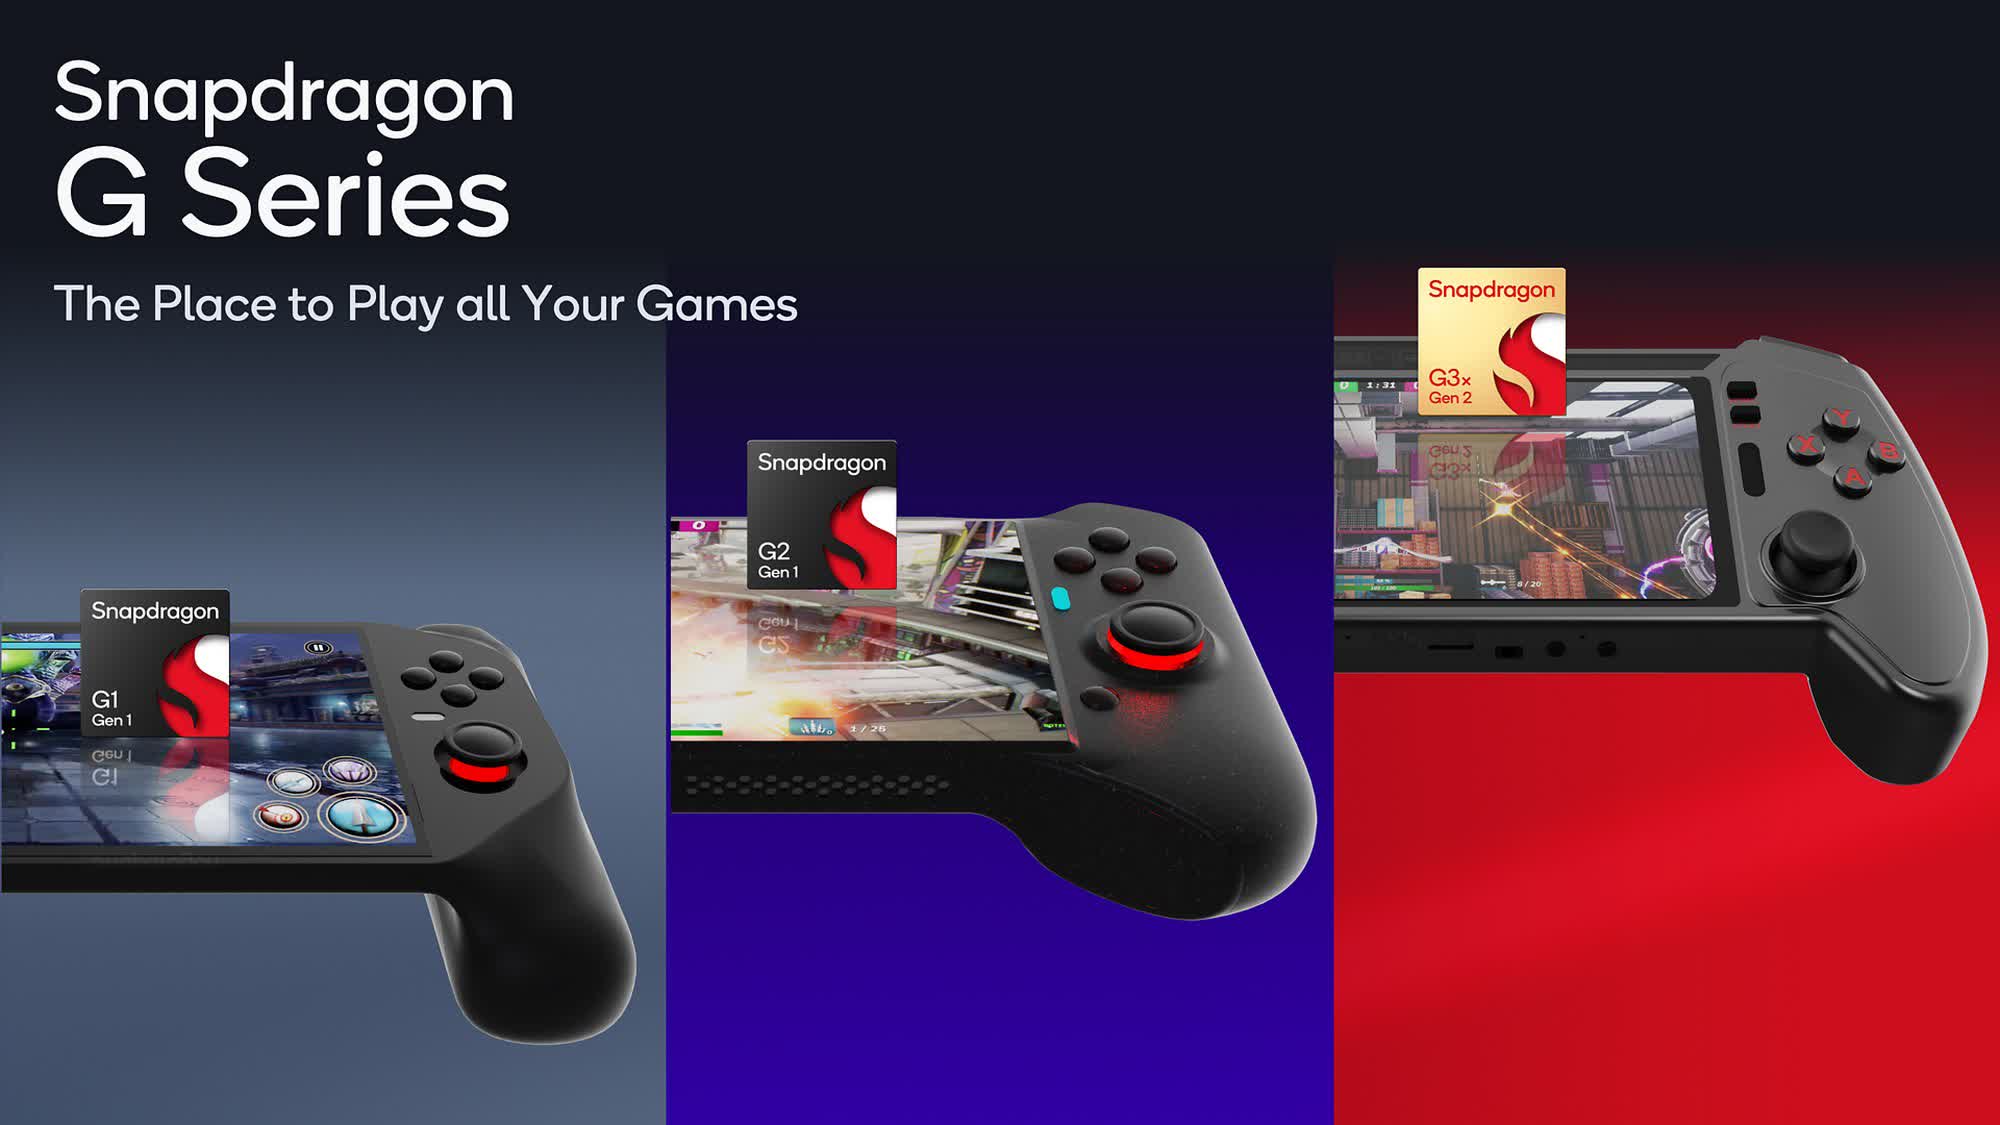 Qualcomm unveils new Snapdragon G-series chips for handheld game consoles